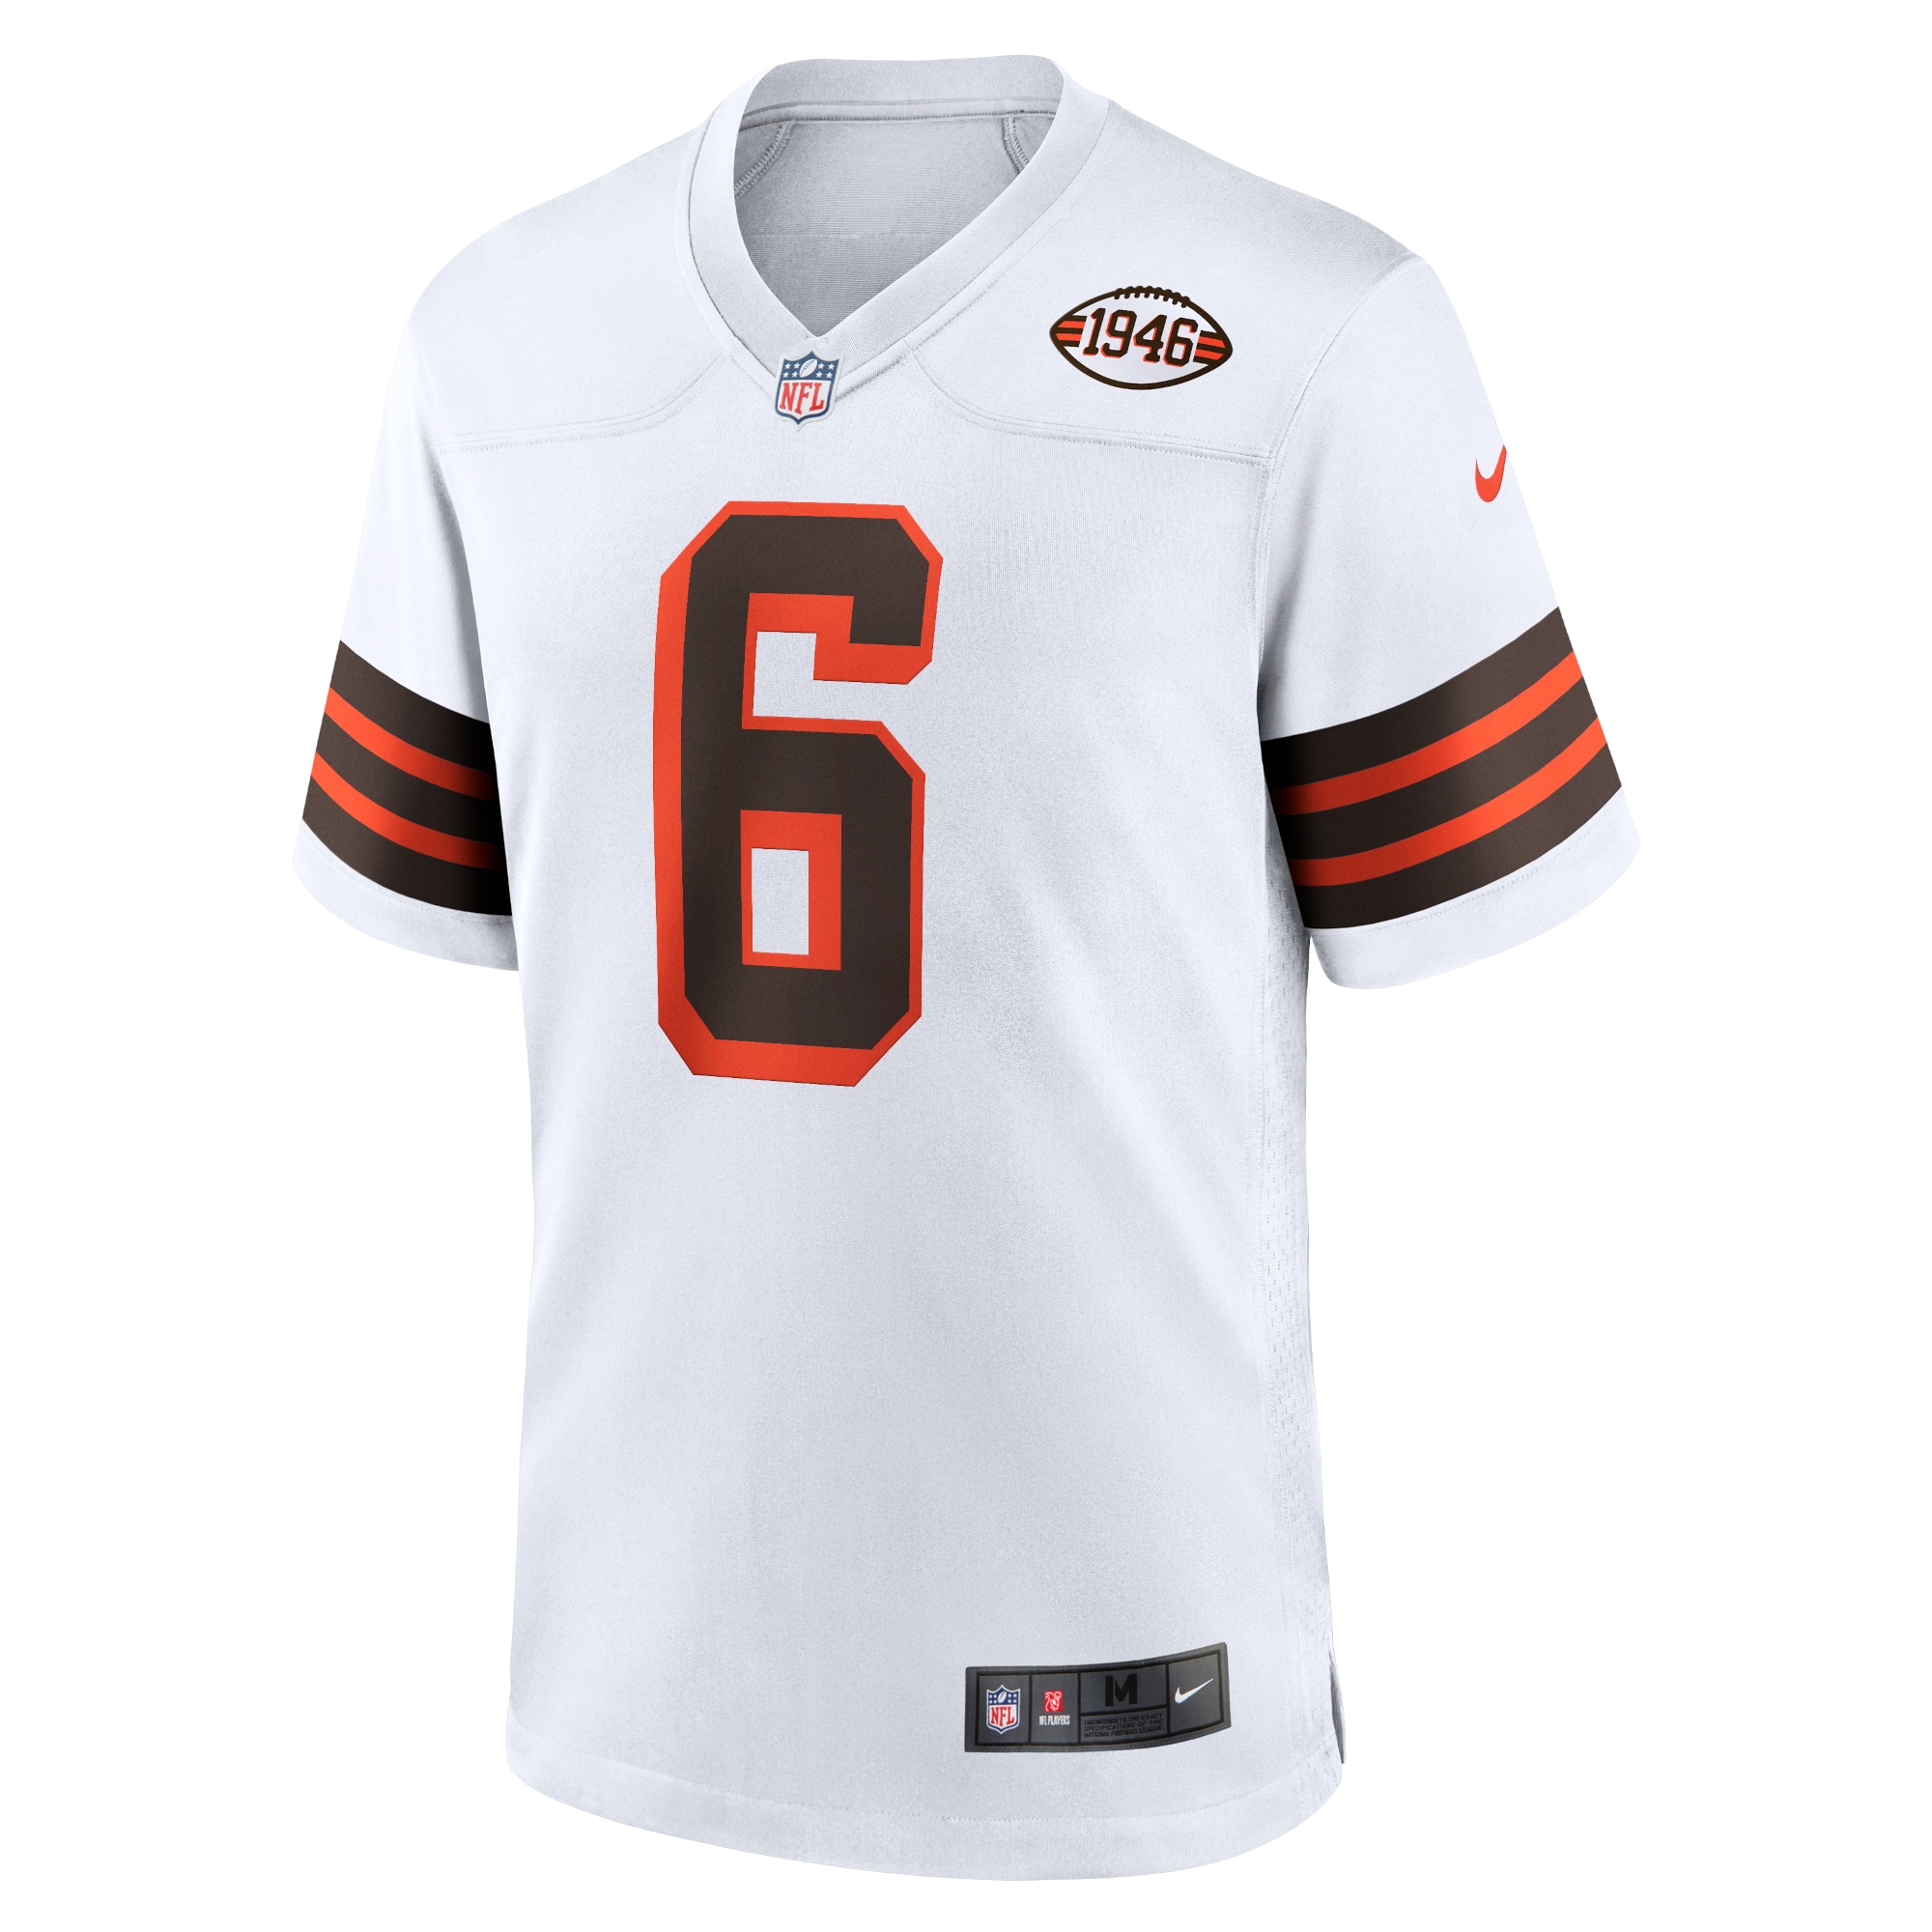 Men's Cleveland Browns Jerseys White Baker Mayfield 1946 Collection Alternate Game Style